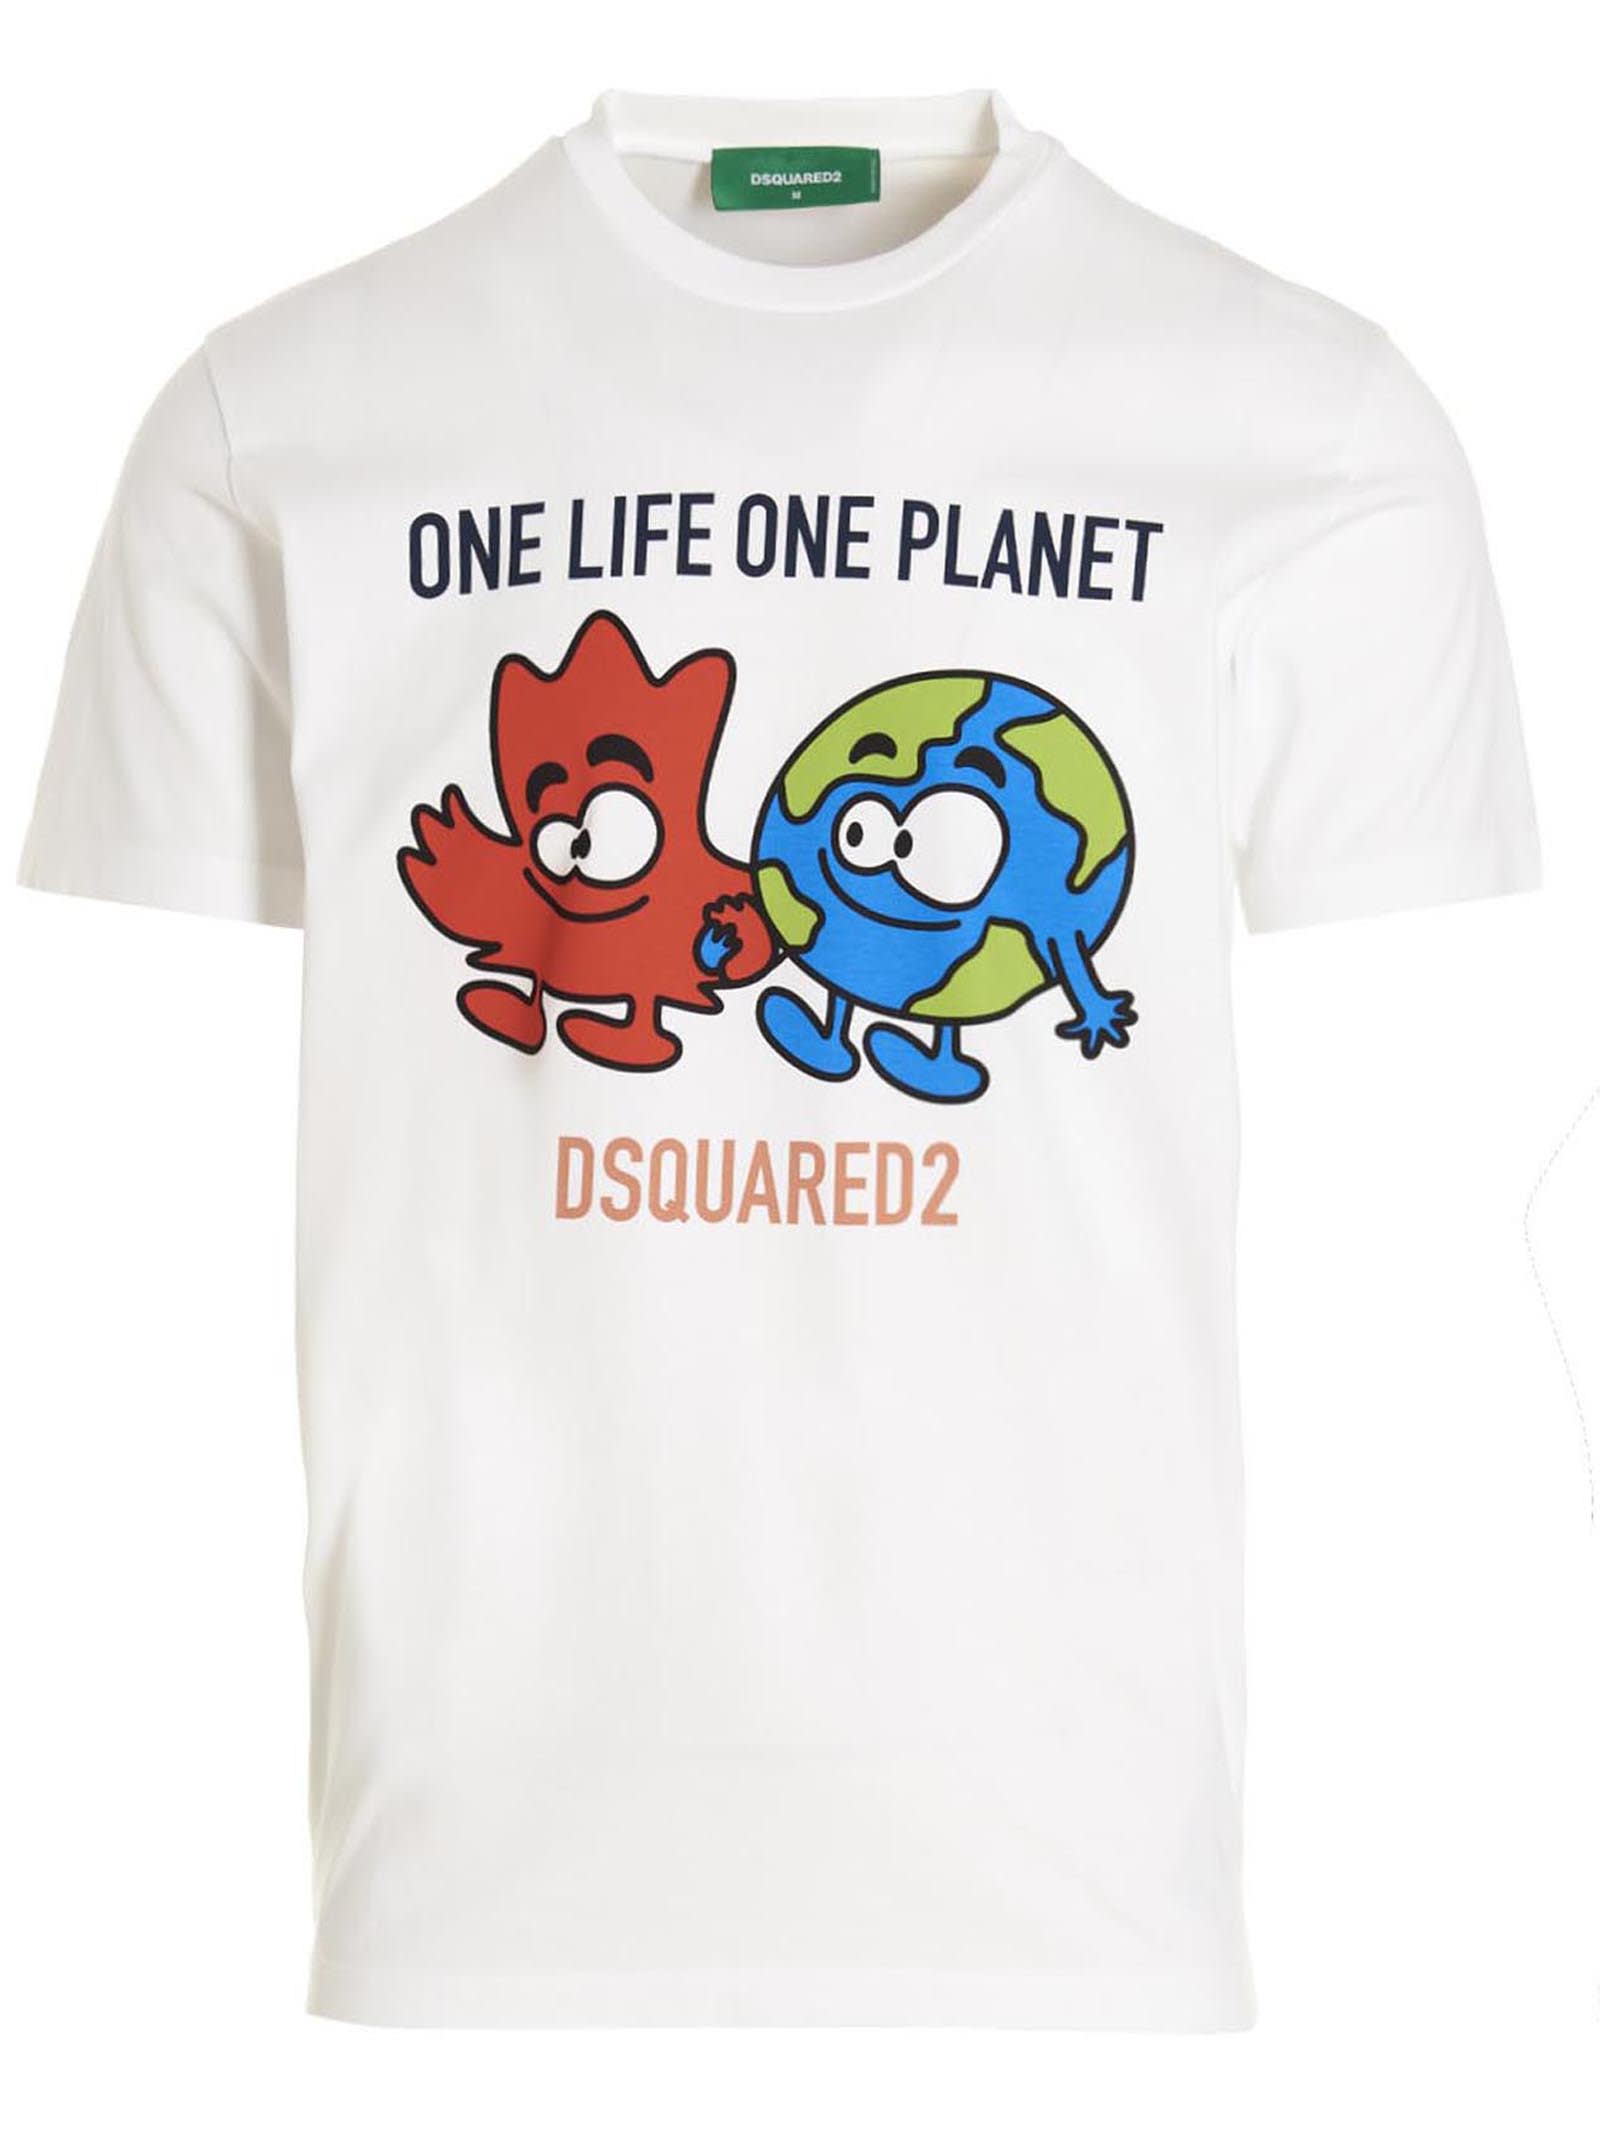 Dsquared2 T-shirt one Life One Planet Buddies